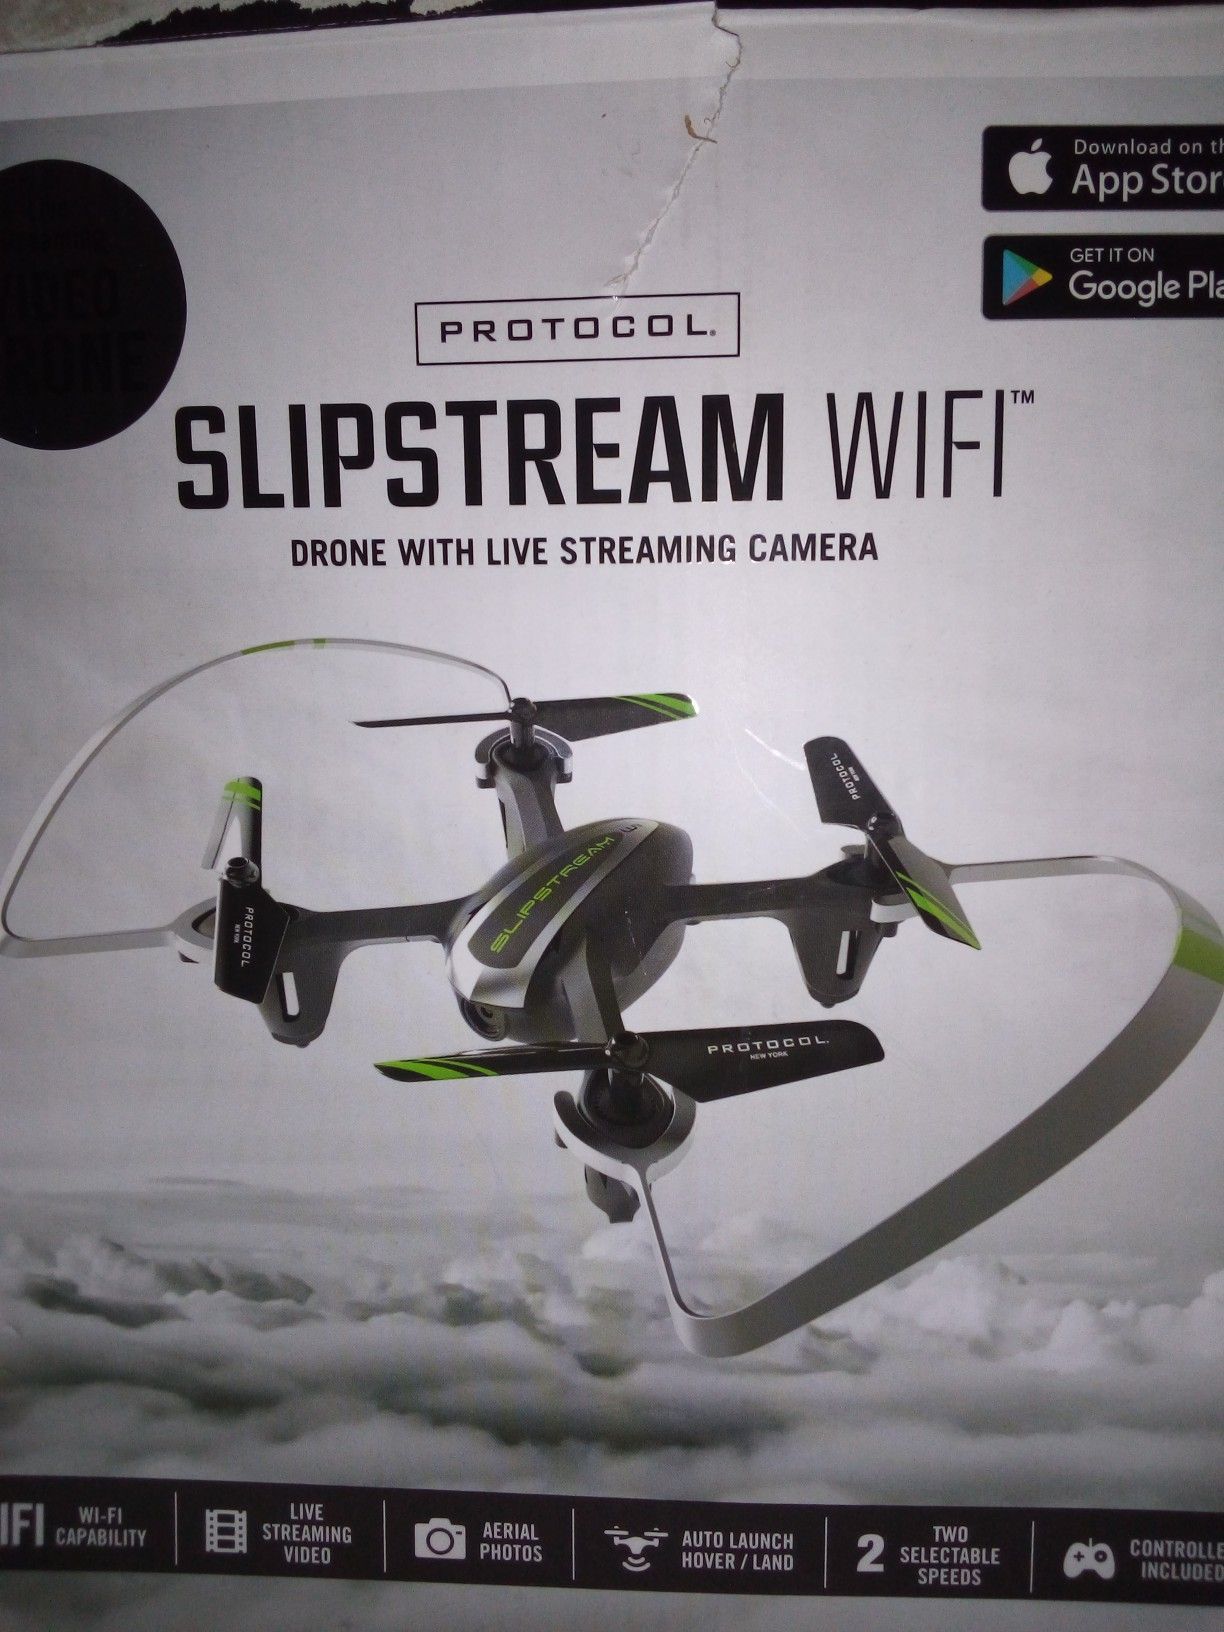 Slipstream wifi drone with live streaming camera